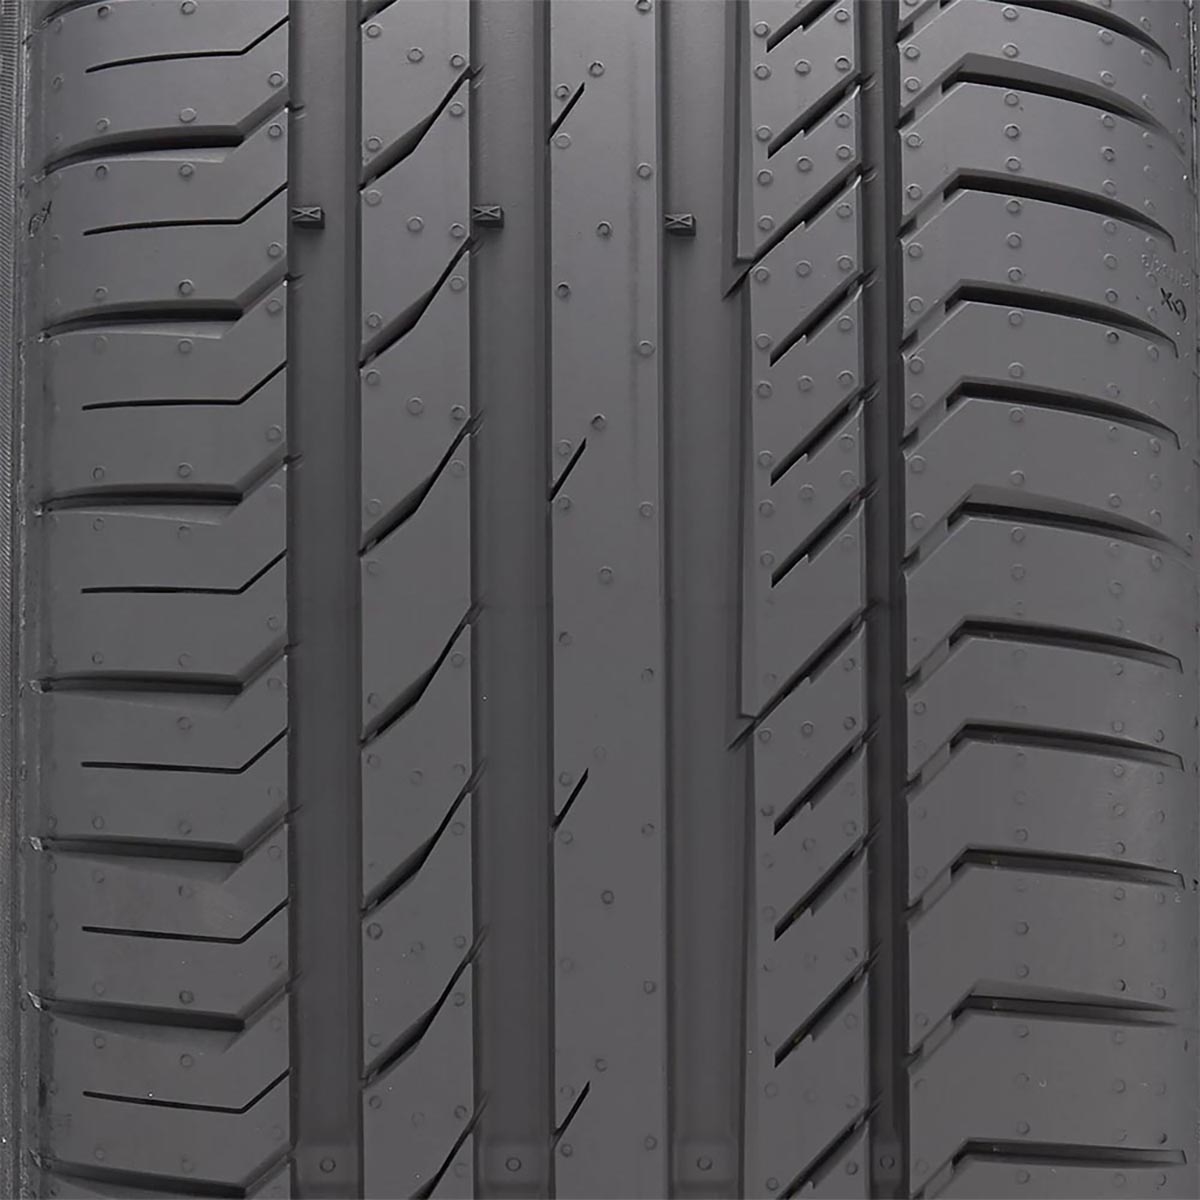 245/40R17 CONTISPORTCONTACT 5 91W MB CONTI                  